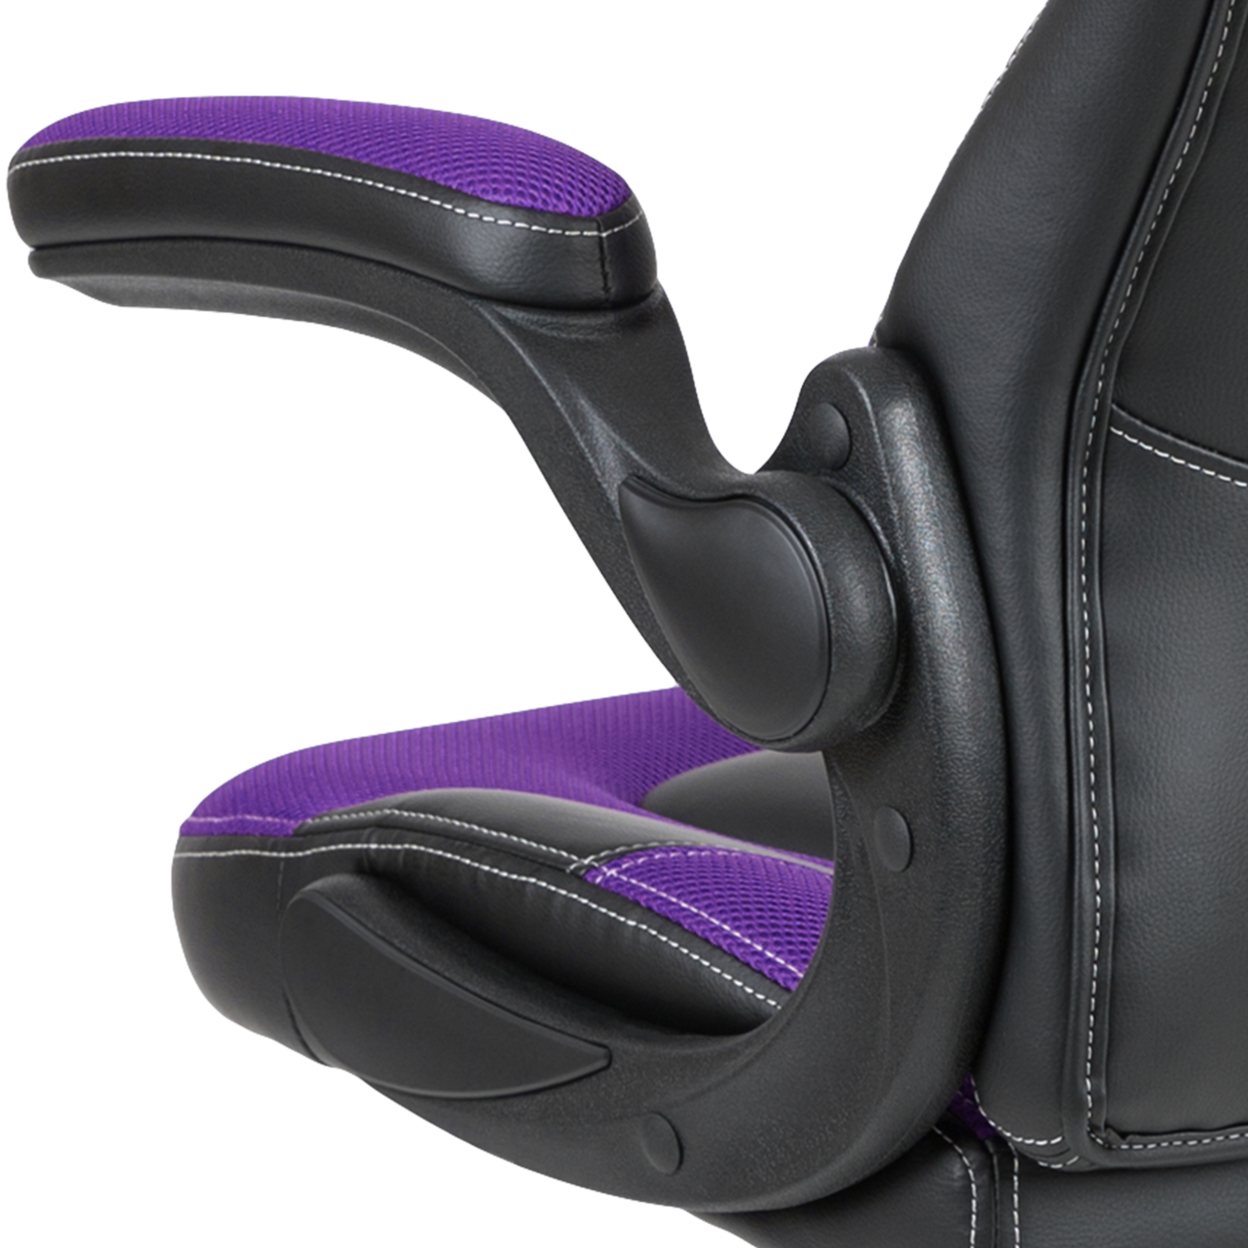 X10 Gaming Chair Racing Office Ergonomic Computer PC Adjustable Swivel Chair With Flip-up Arms, Purple And Black LeatherSoft